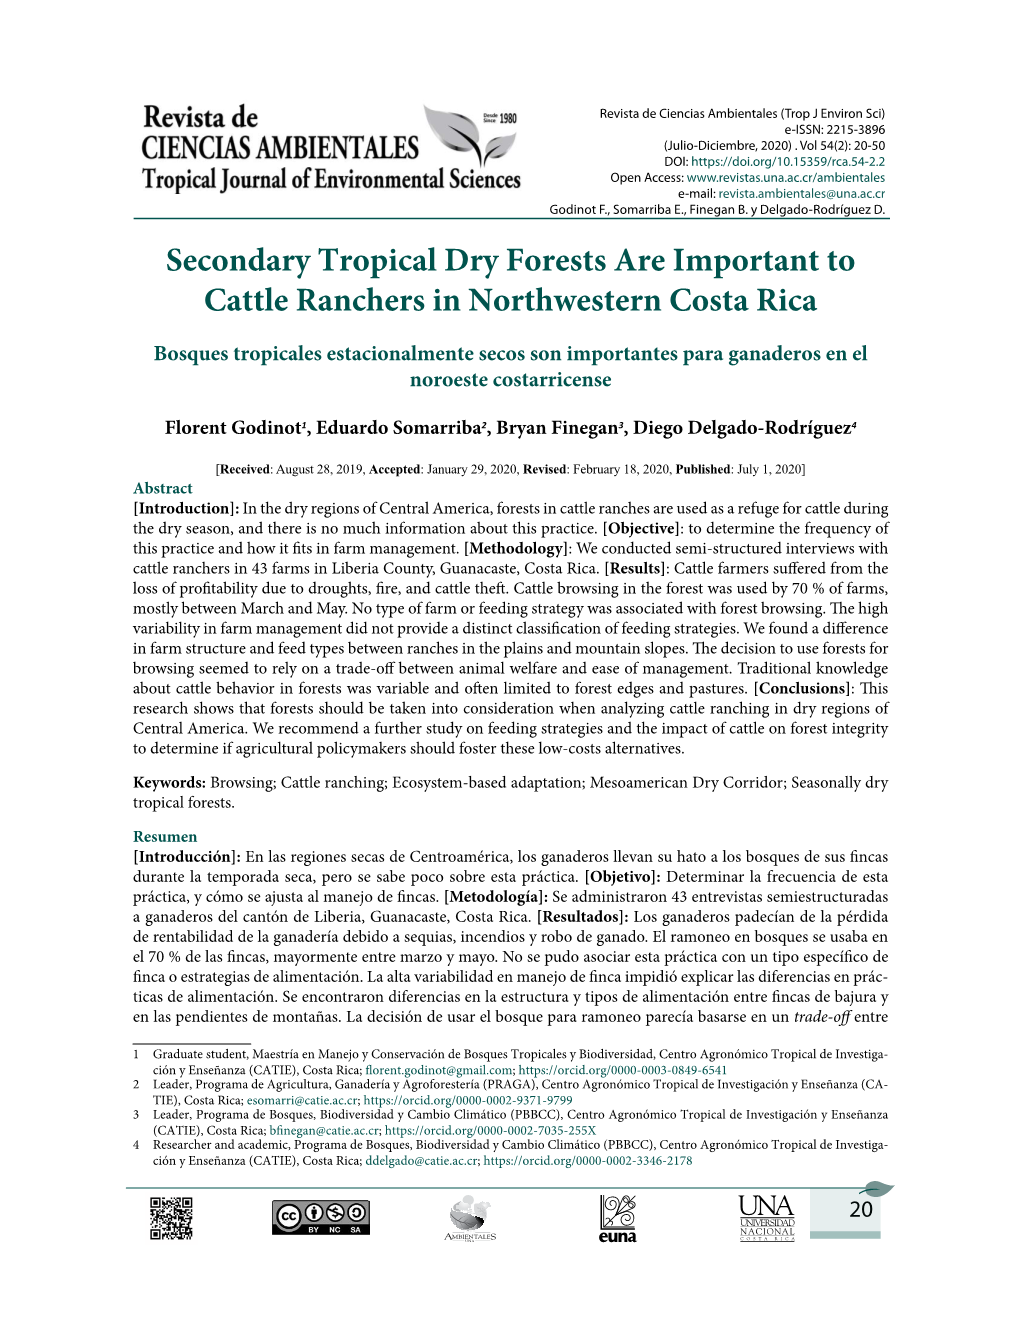 Secondary Tropical Dry Forests Are Important to Cattle Ranchers in Northwestern Costa Rica